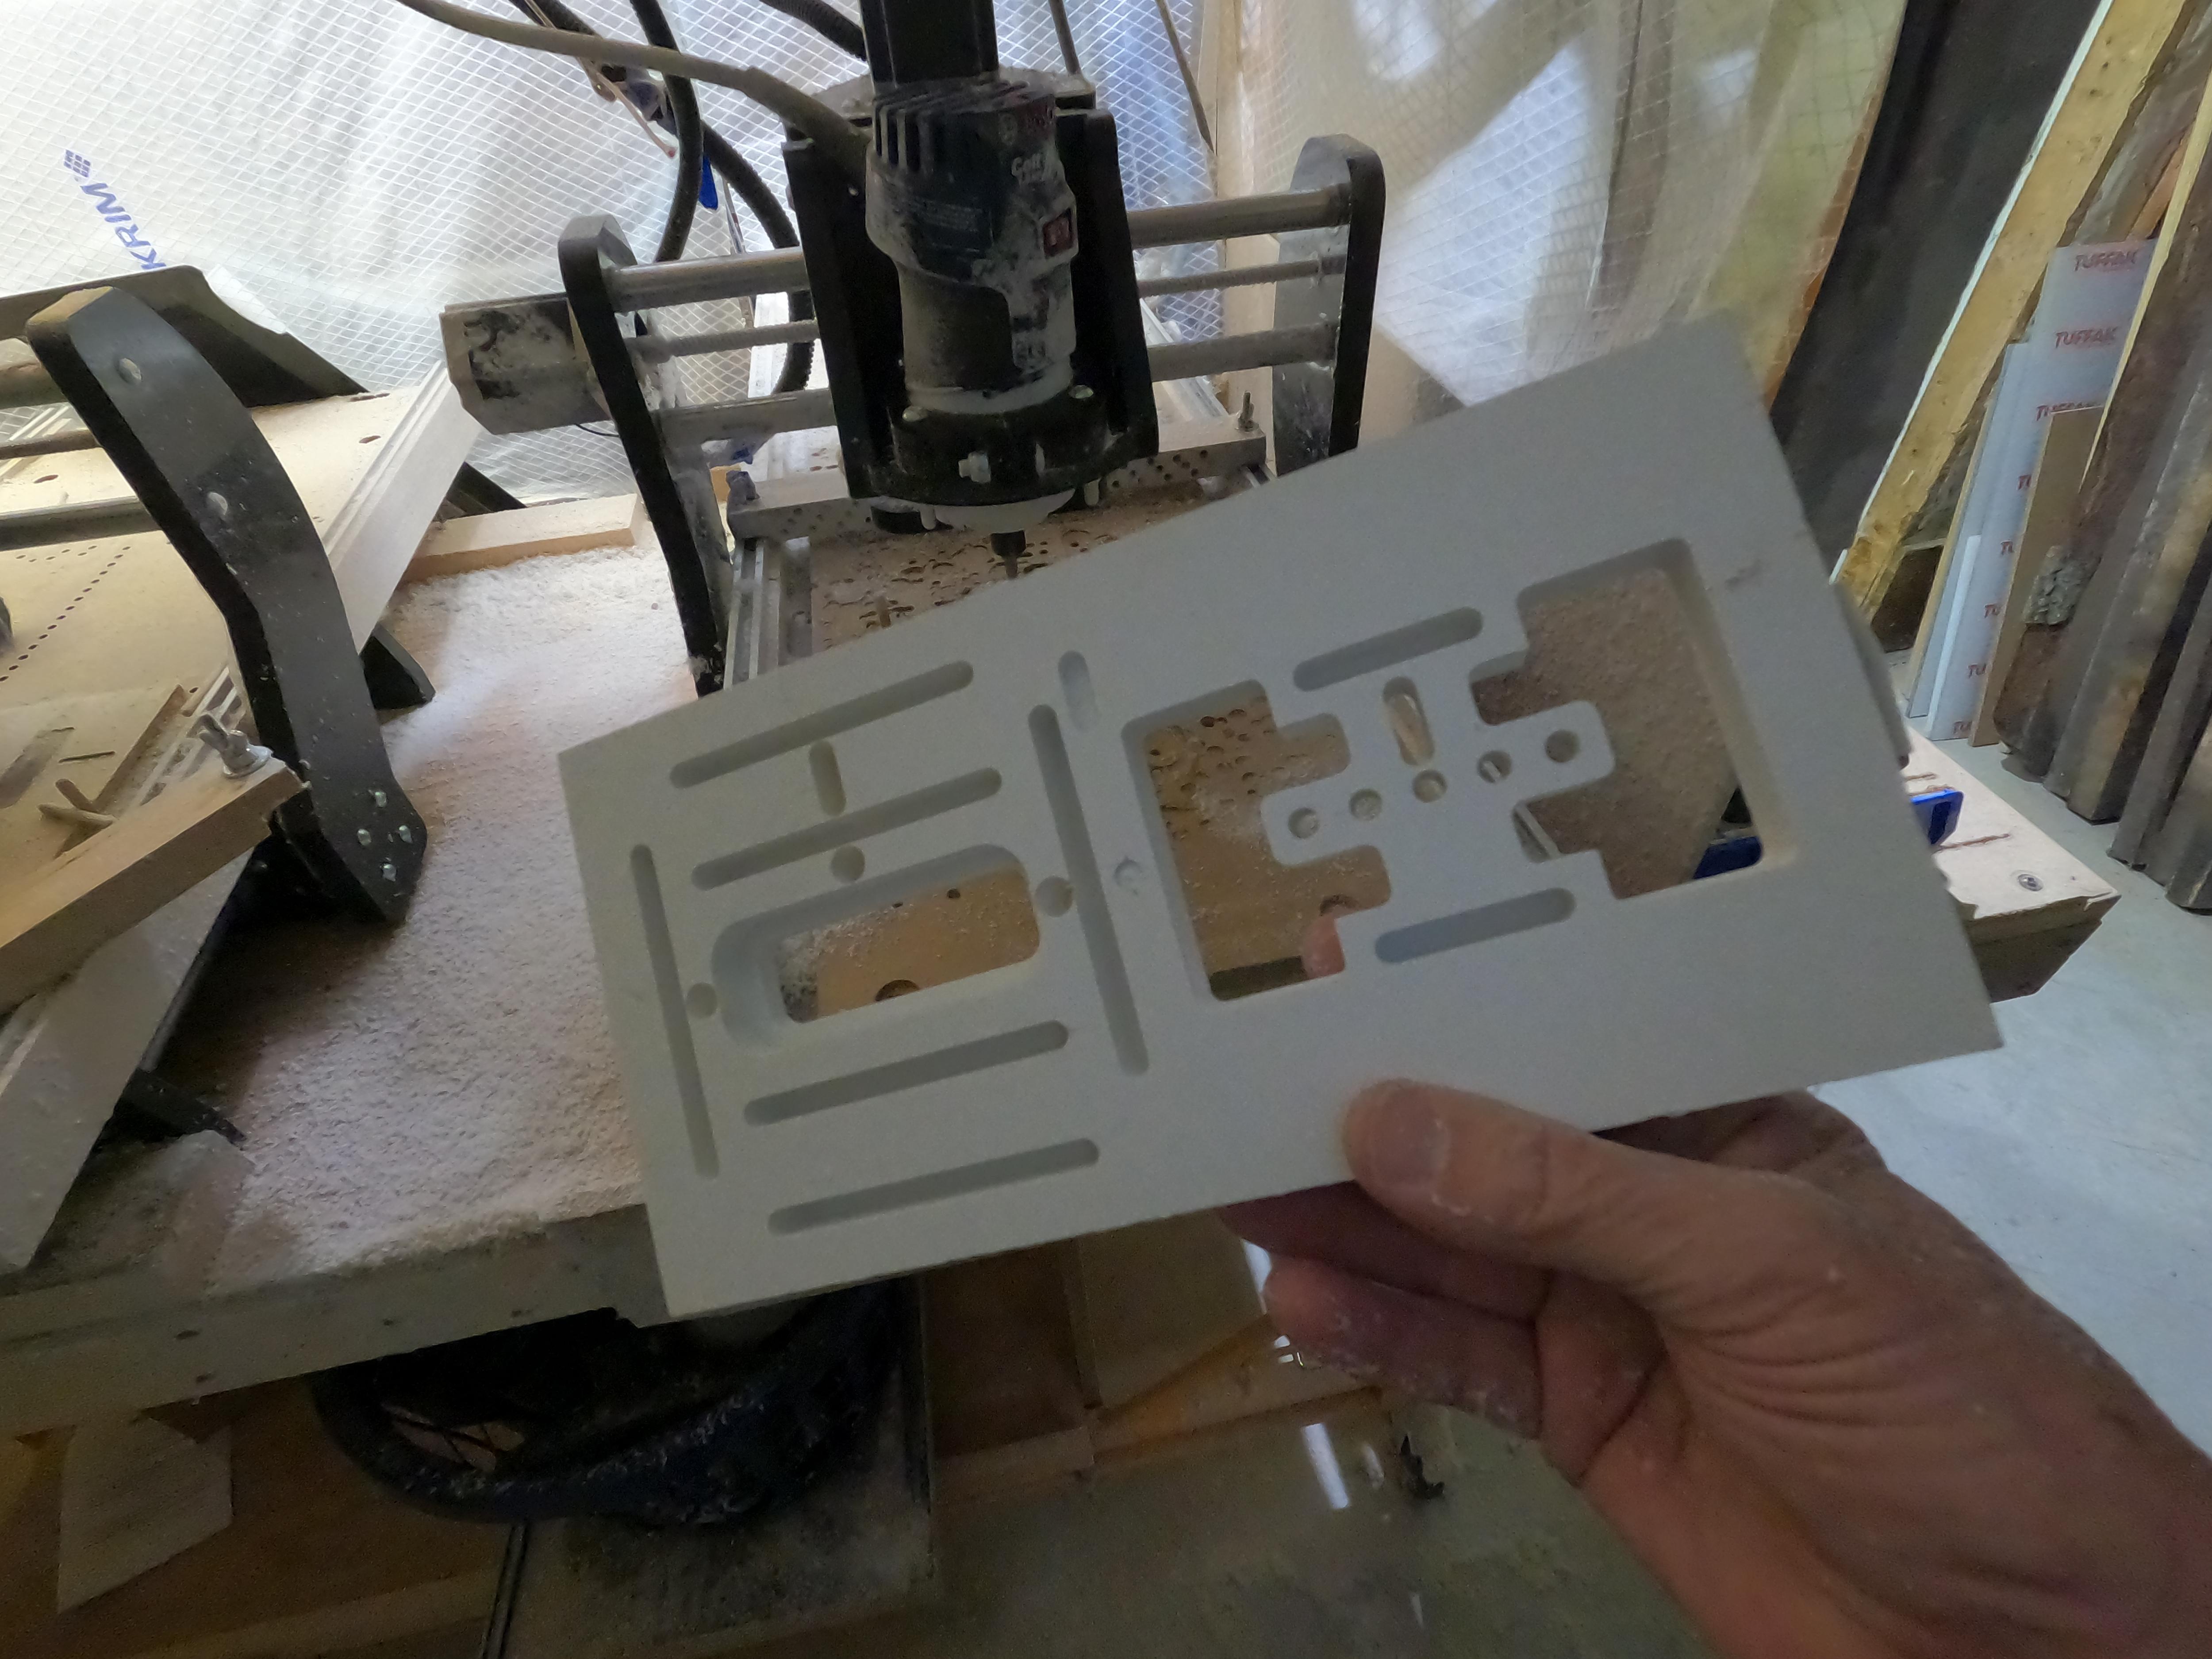 Router Template Via CNC for Mortise and Tenon (16).JPG